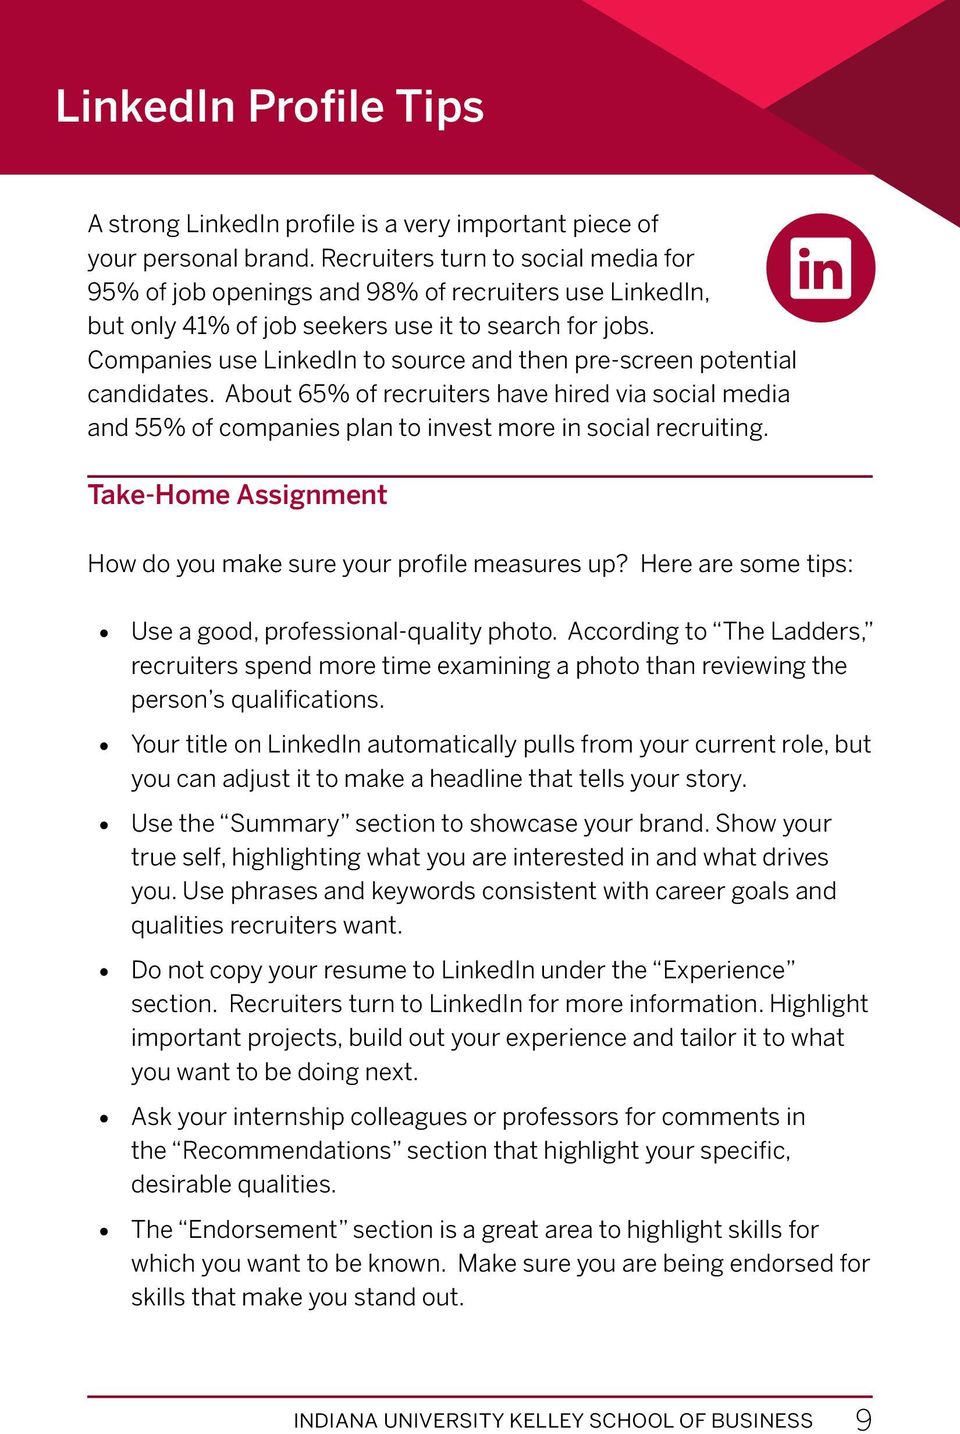 Companies use LinkedIn to source and then pre-screen potential candidates. About 65% of recruiters have hired via social media and 55% of companies plan to invest more in social recruiting.